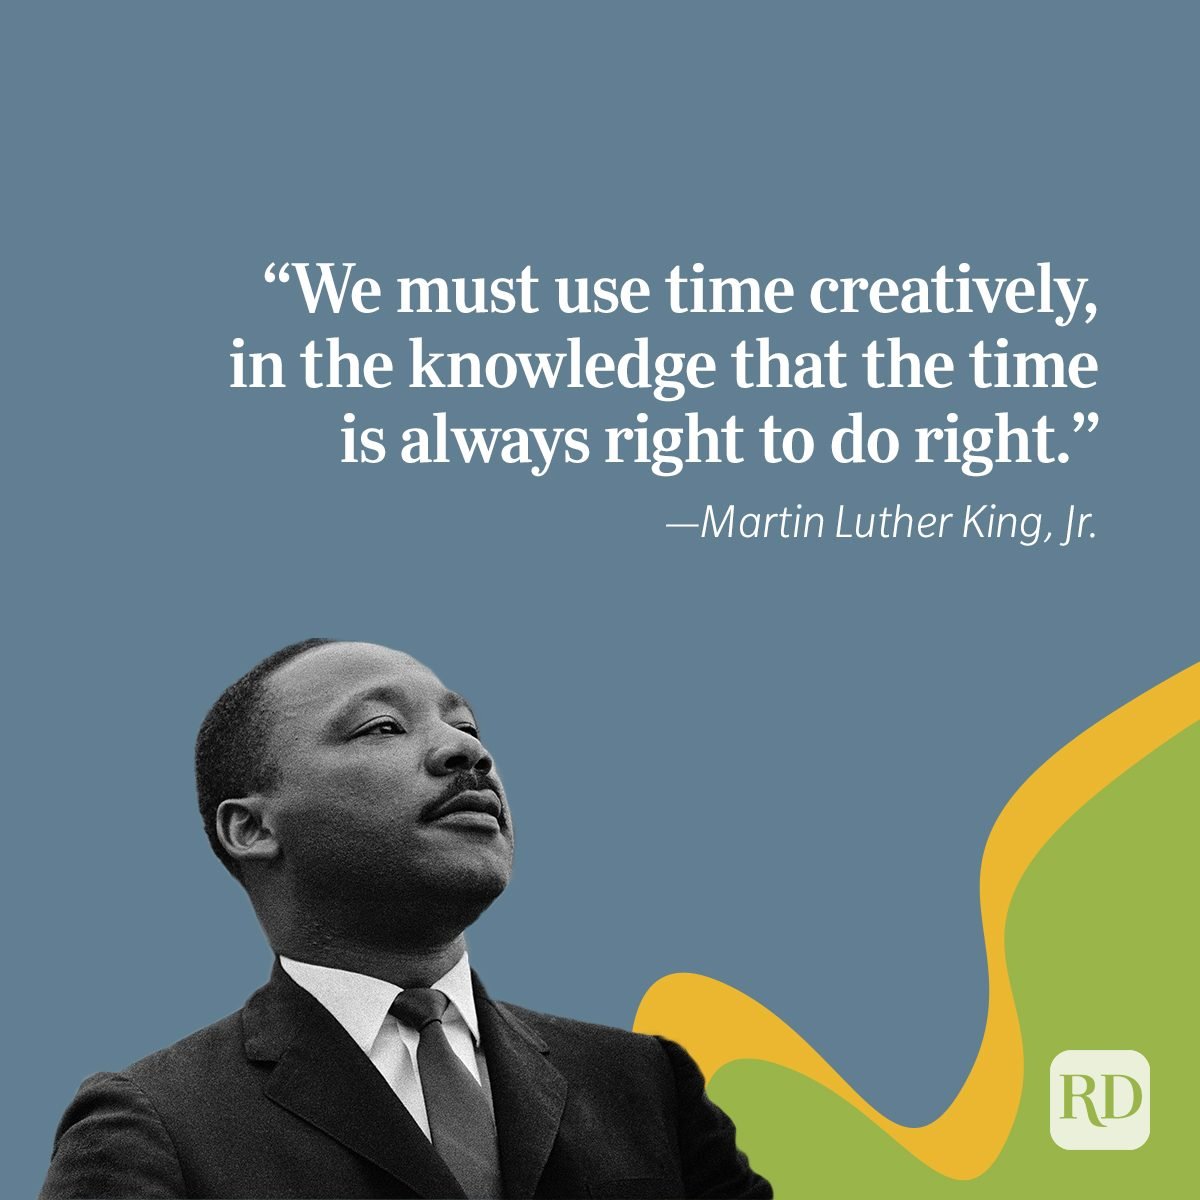 50 Inspirational Martin Luther King, Jr. Quotes | Reader's Digest